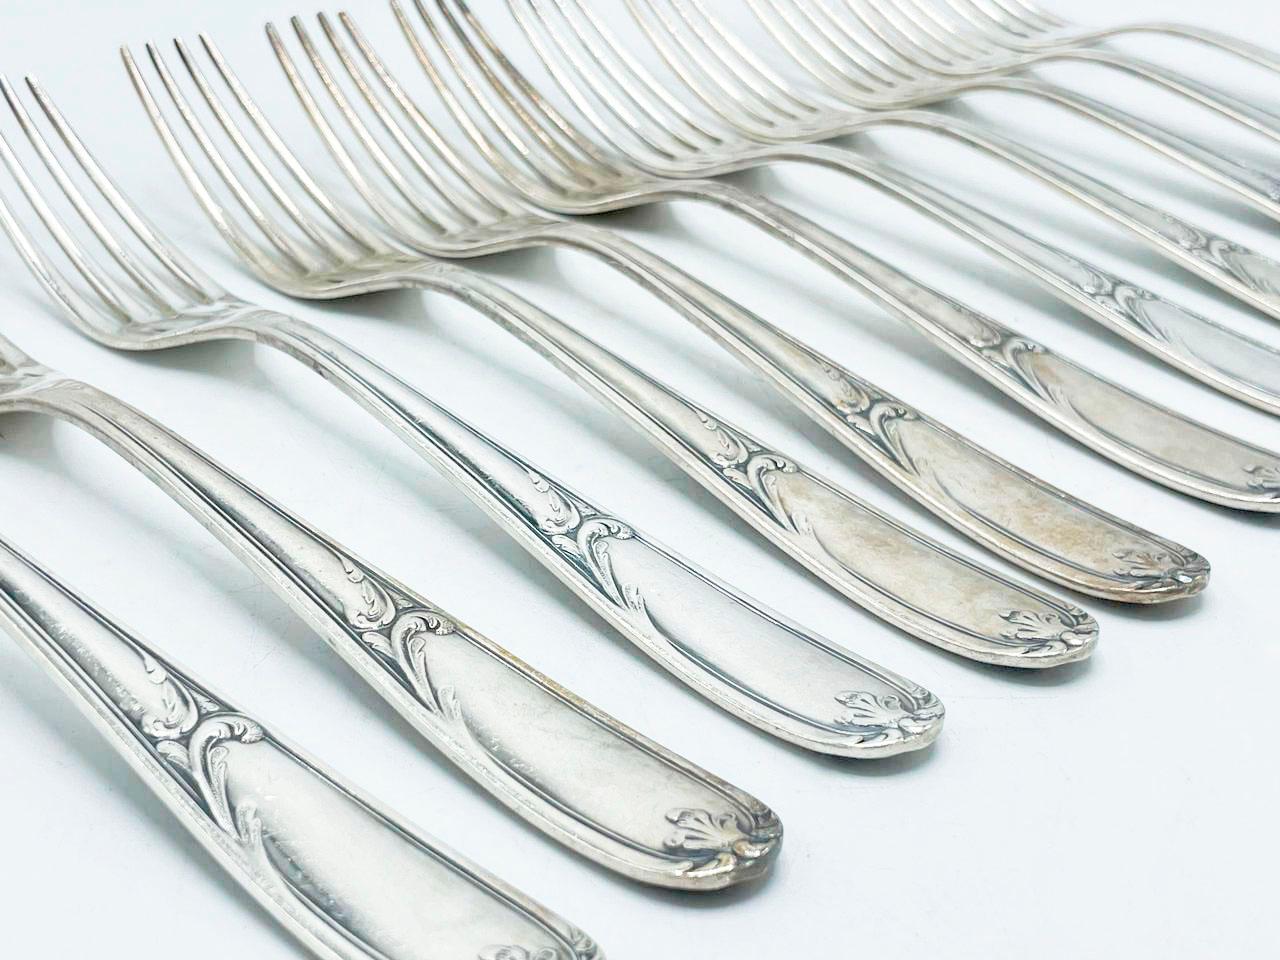 Christofle Made in Argentina, Flatware art nouveau in Silverplated For Sale 1